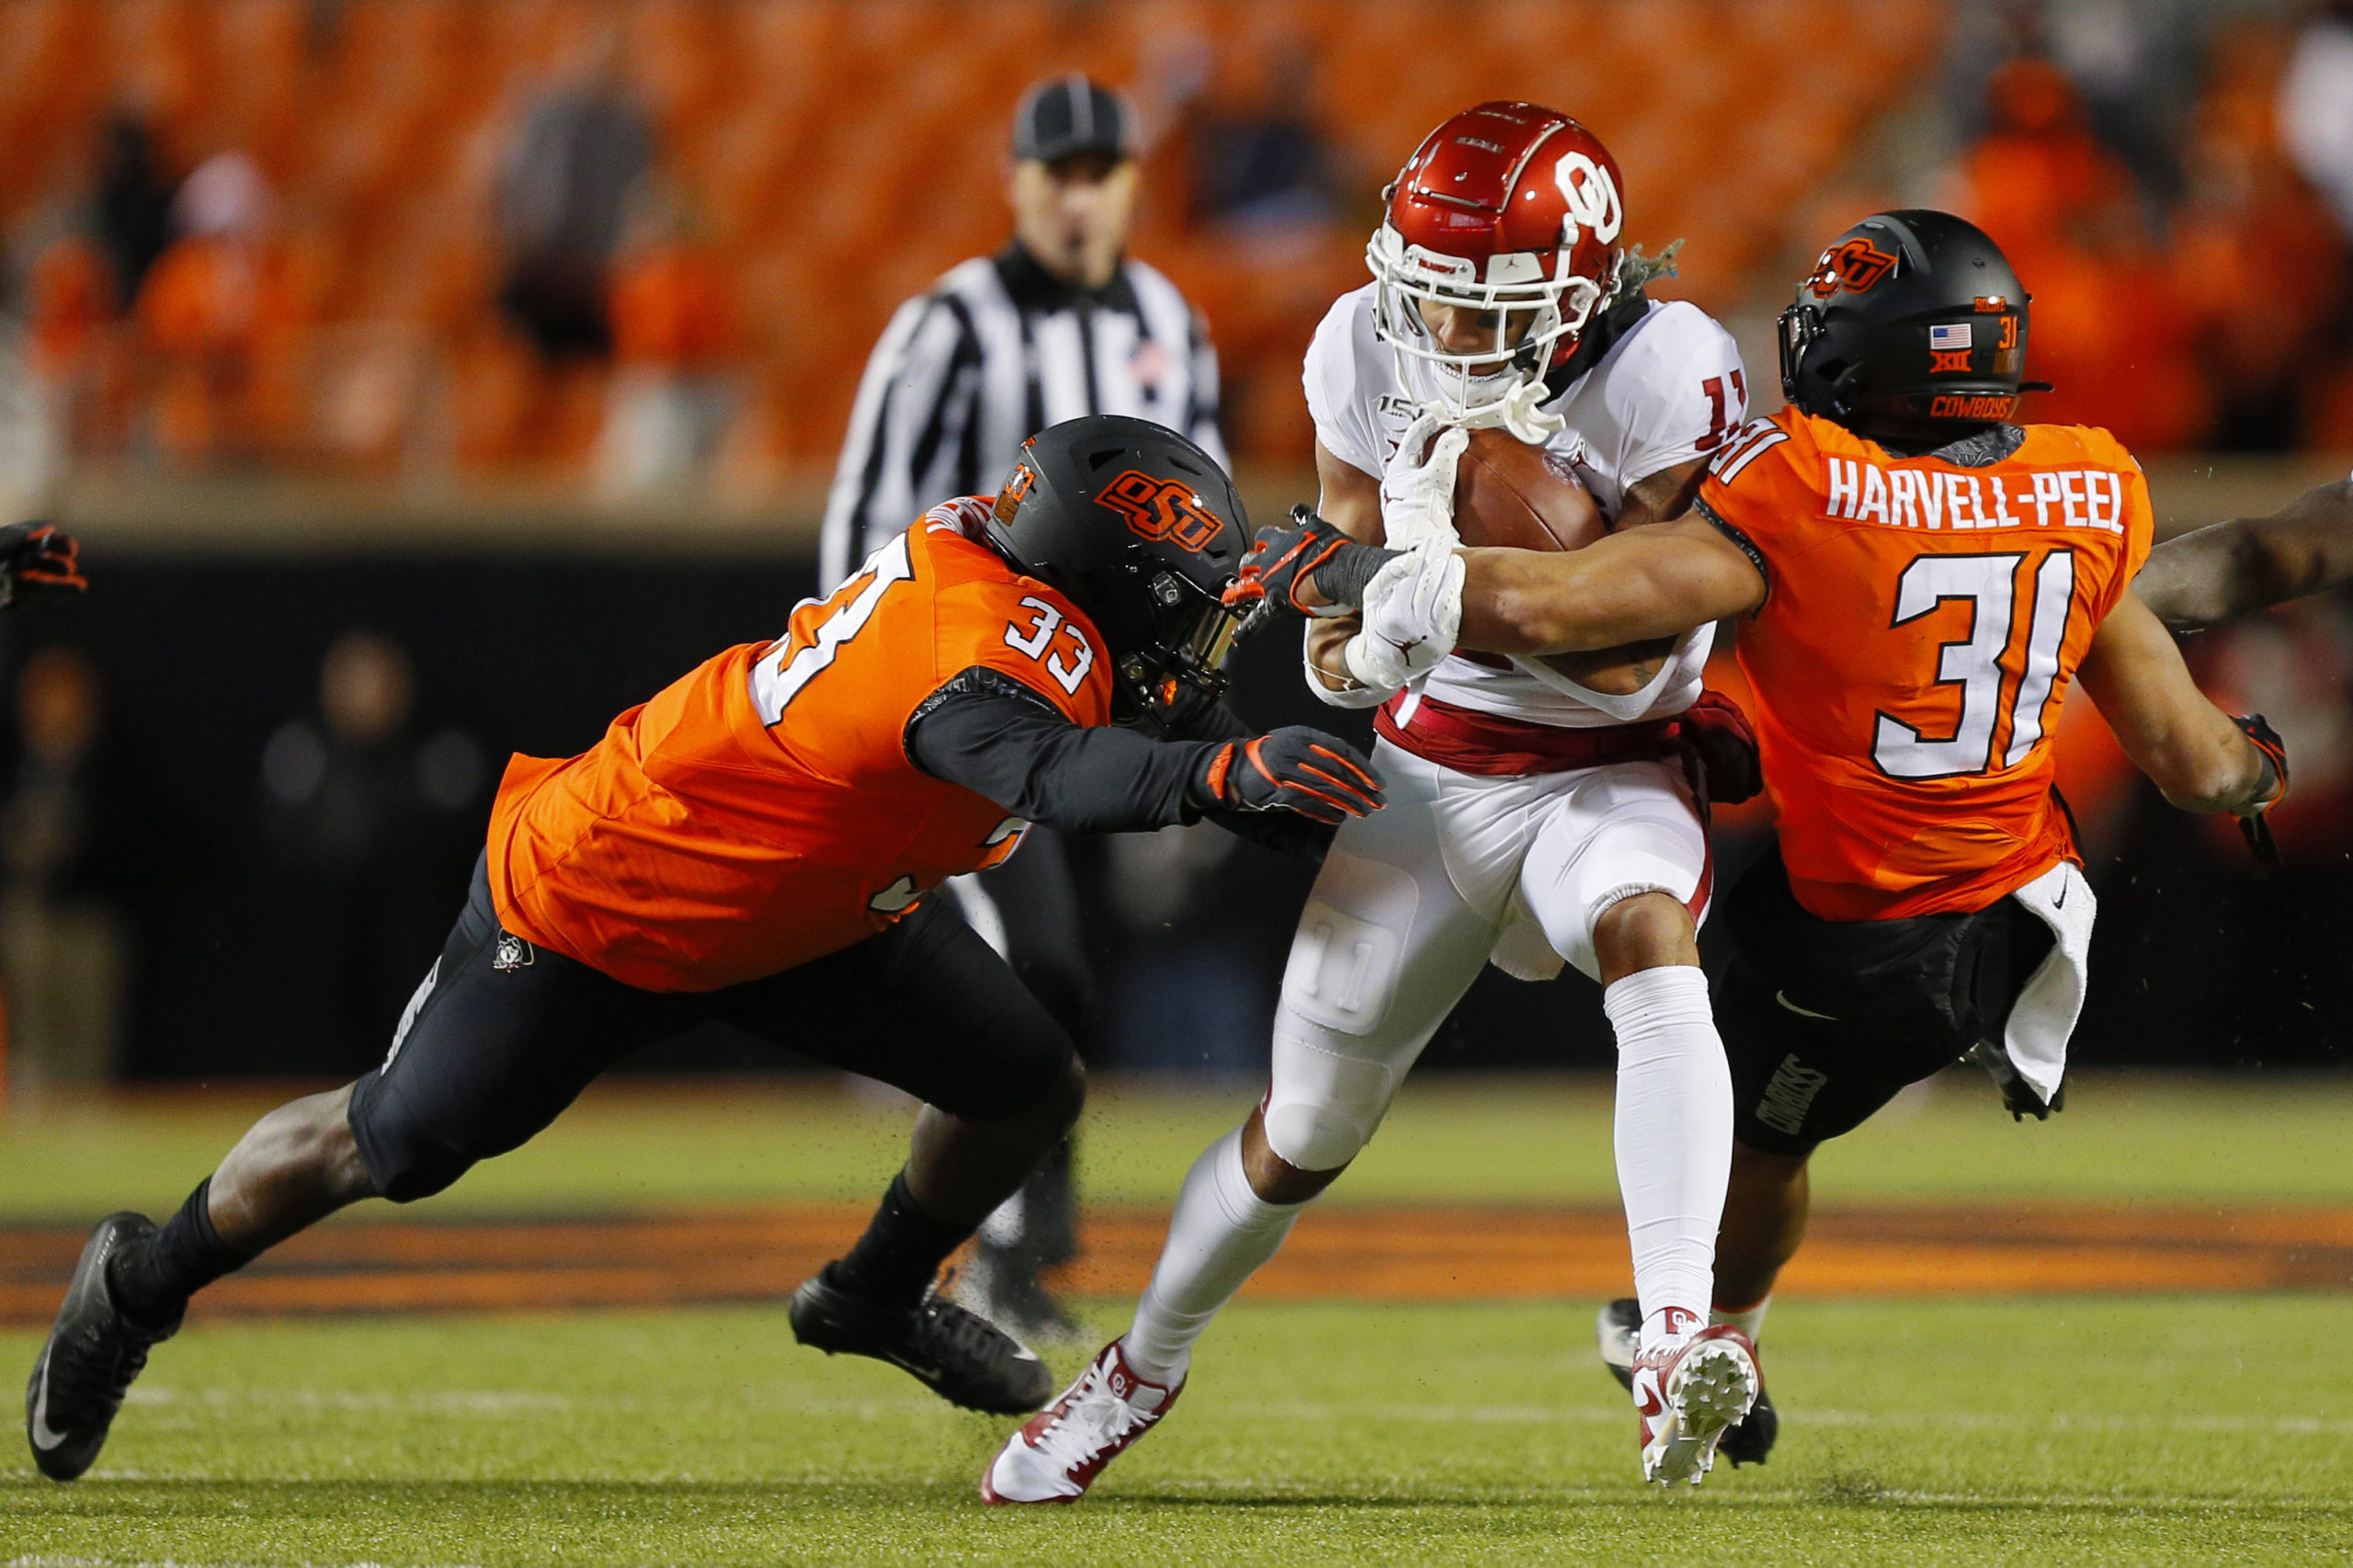 Bedlam could survive and become an annual SEC matchup